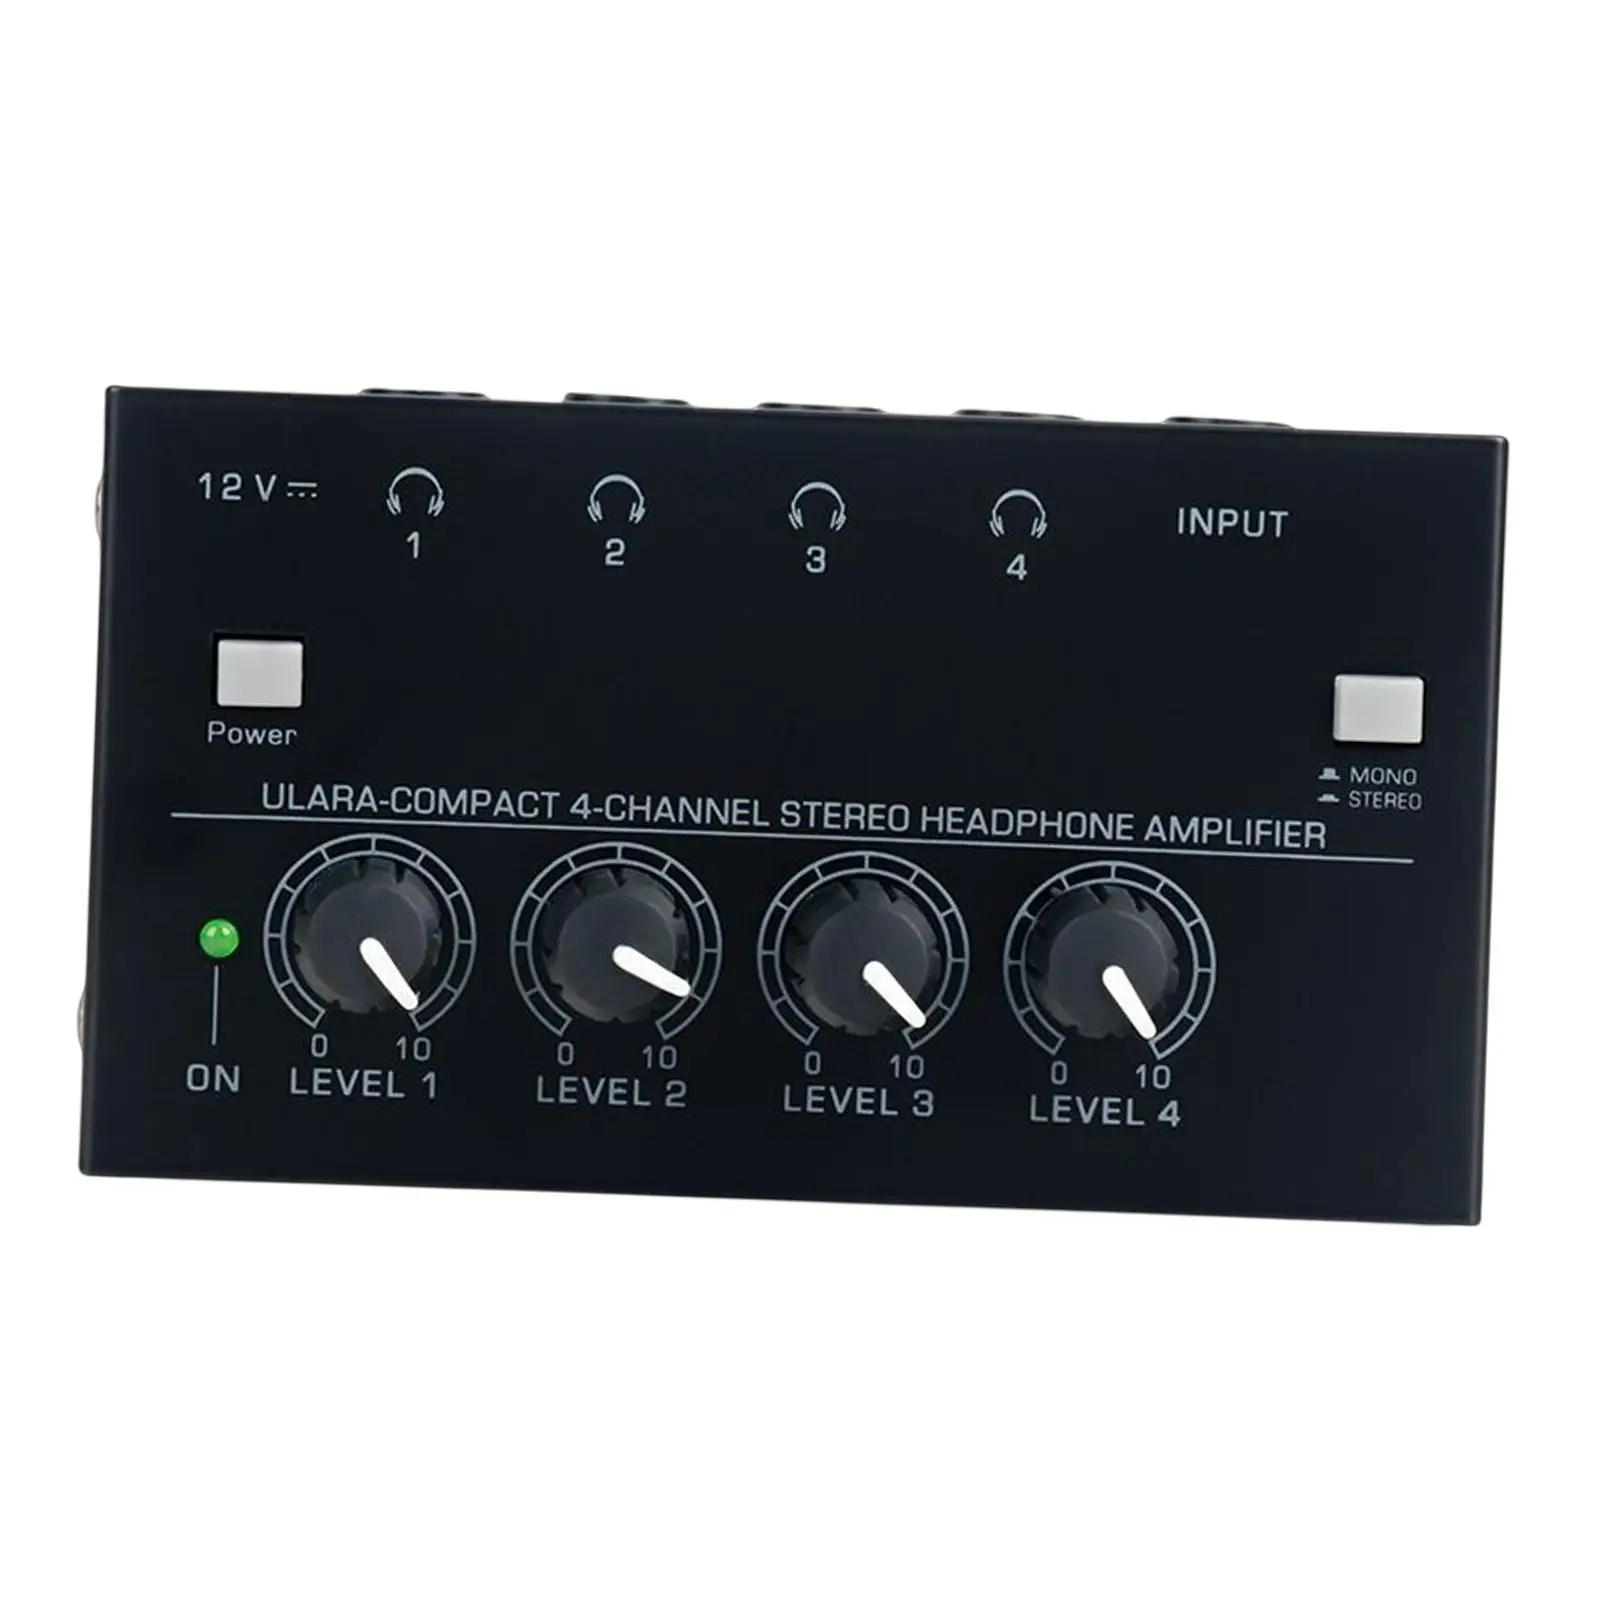 Compact Stereo Headphone Amplifier Stereo Audio Amplifier 4 Channels Low Noise Headphone Splitter Amplifier for Studio and Stage